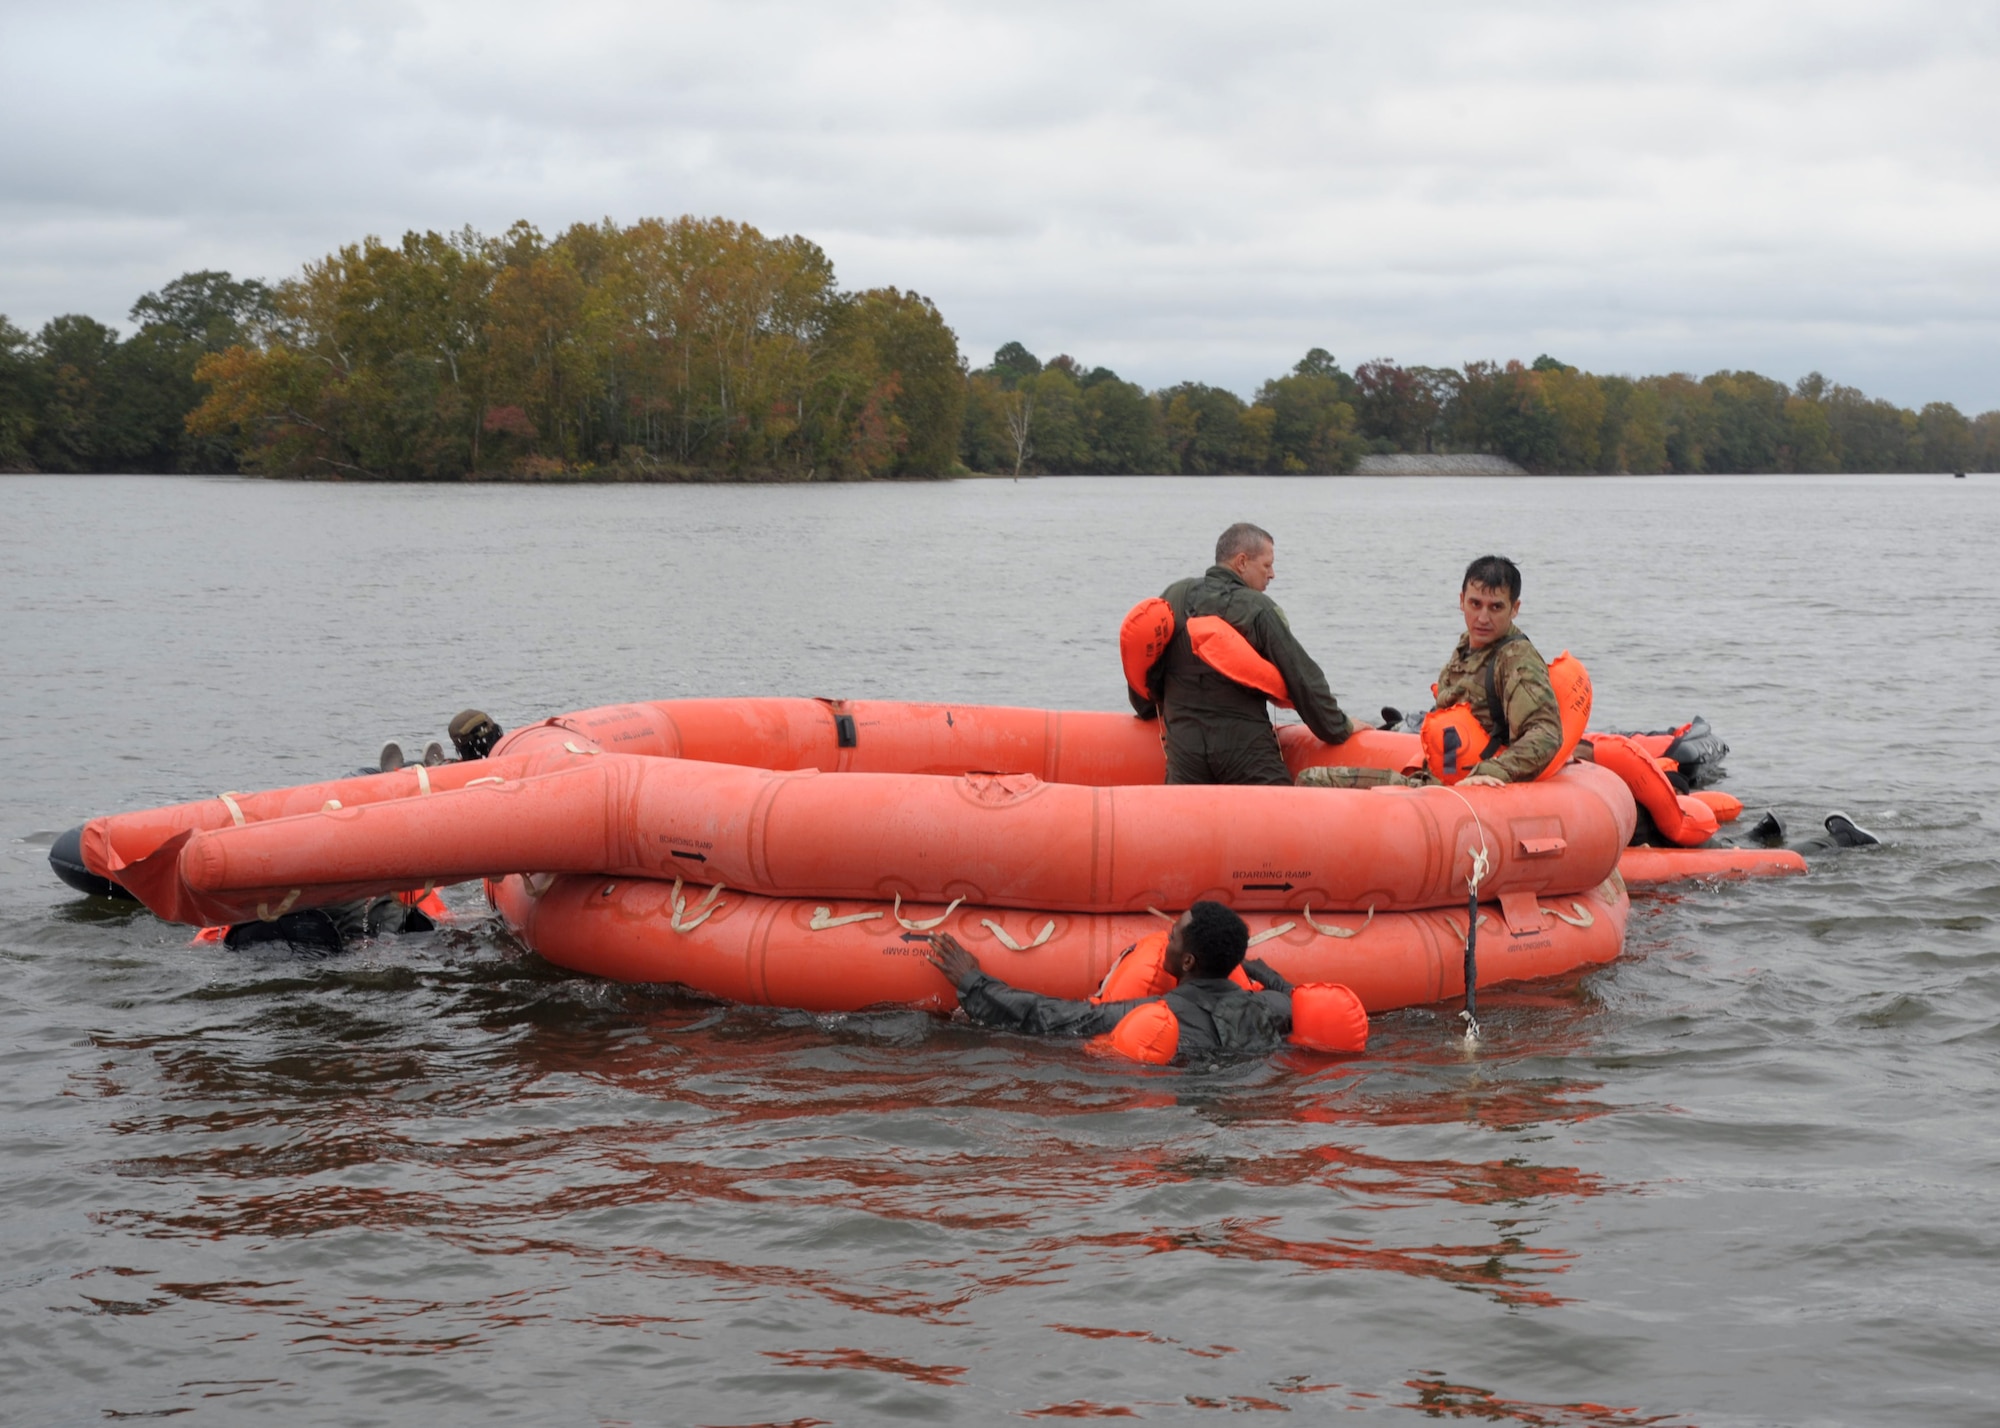 Members of the 908th Operations Group climb aboard a 20-man life raft after being picked up at their designated extraction point Nov. 8, 2020, at Maxwell Air Force Base, Alabama.